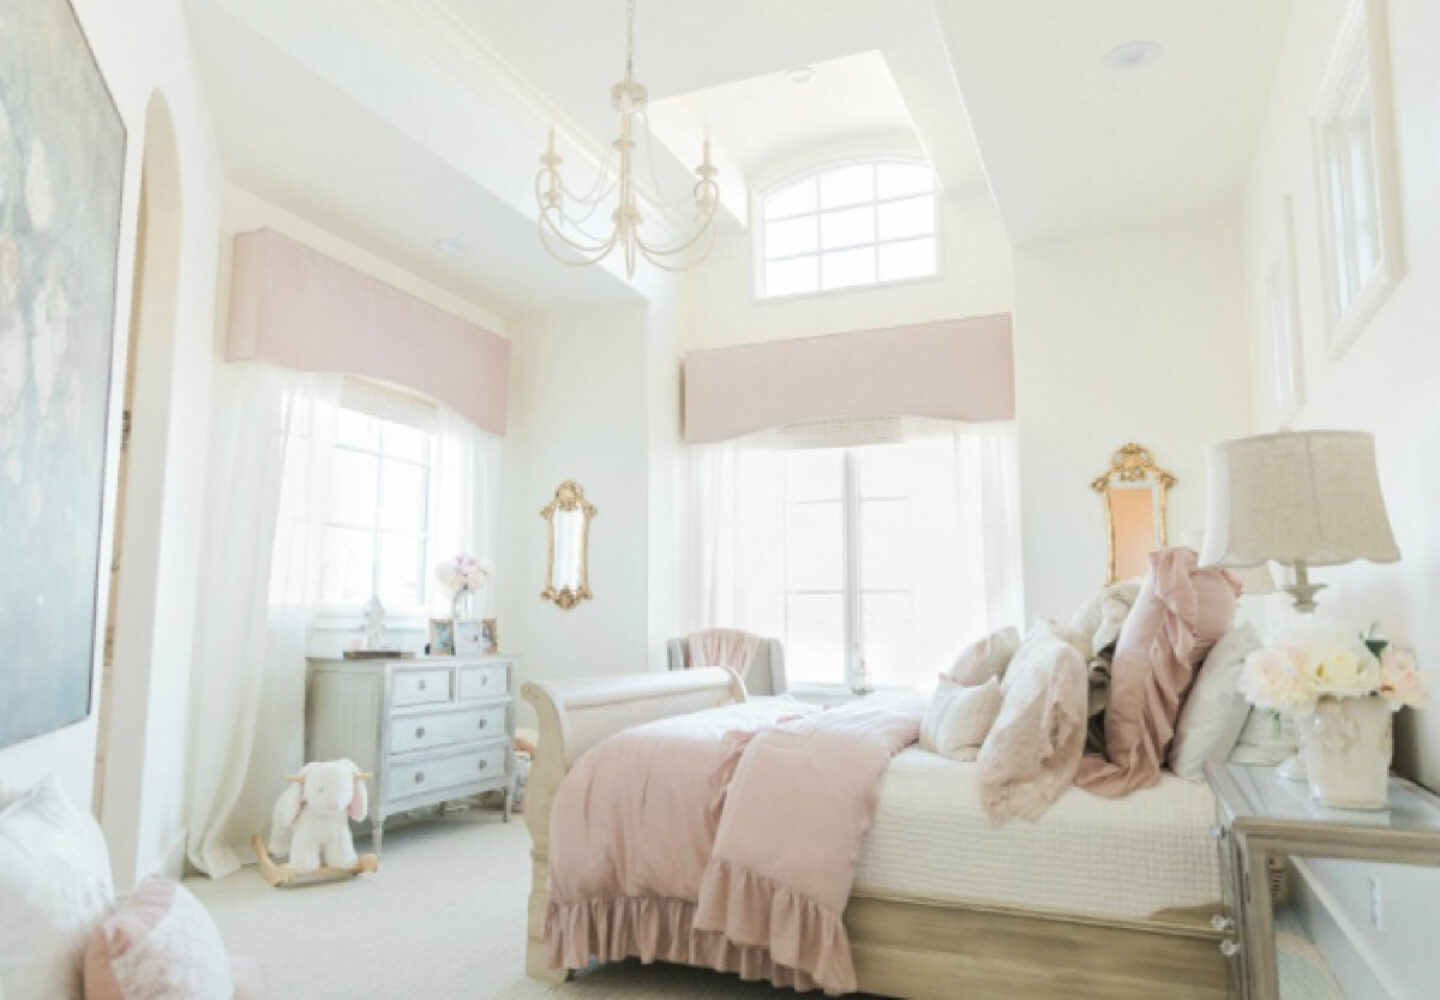 Sherwin Williams Alabaster paint color on walls. Elegant and lofty French country girl's pink bedroom. Romantic French farmhouse style by Brit Jones Design.